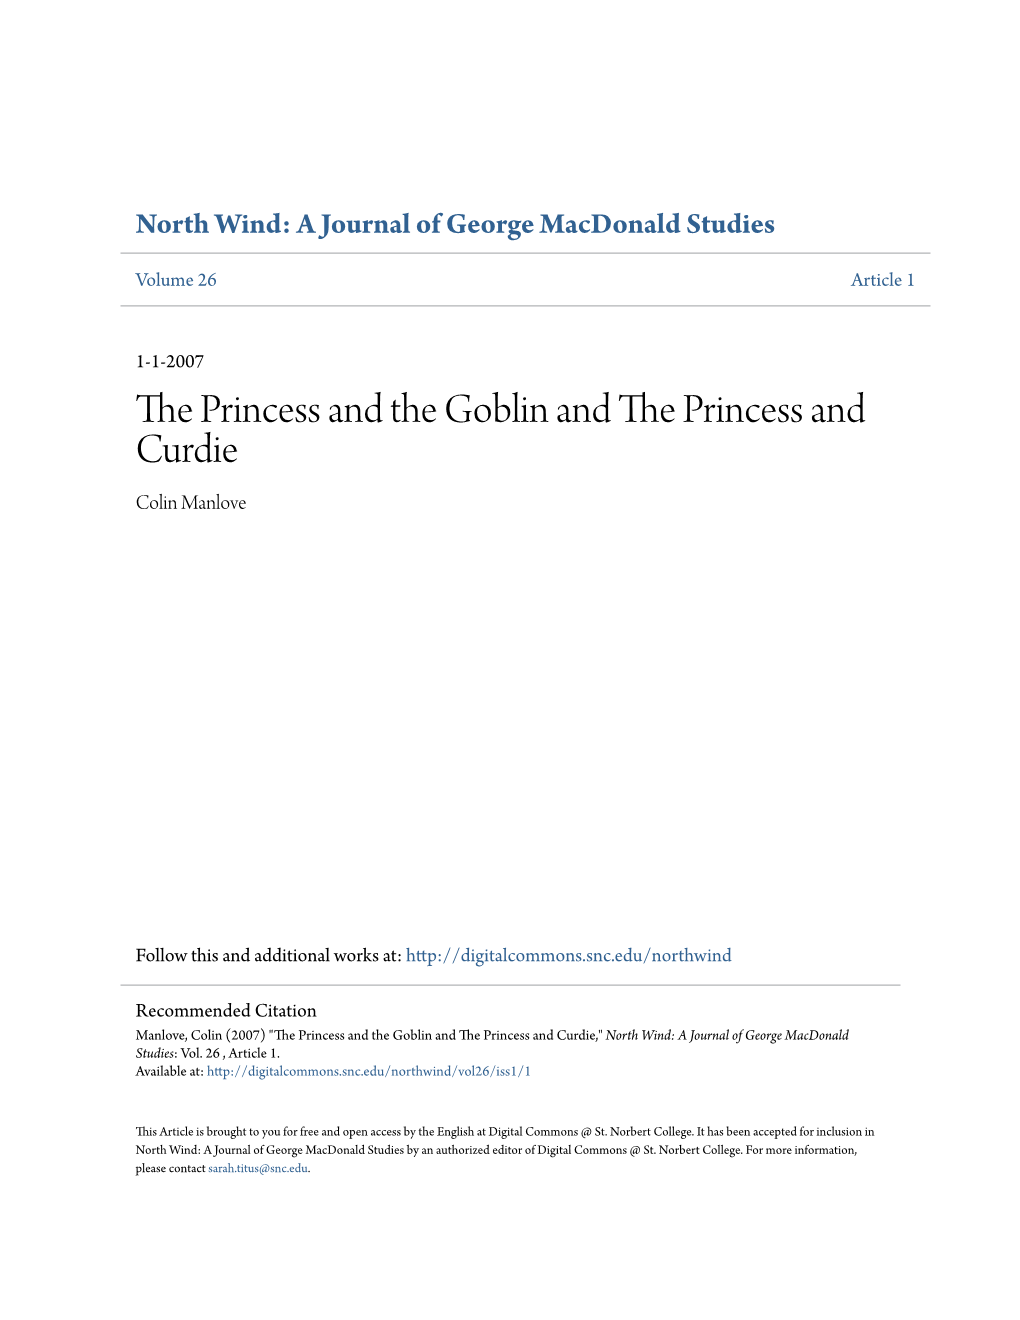 The Princess and the Goblin and the Princess and Curdie